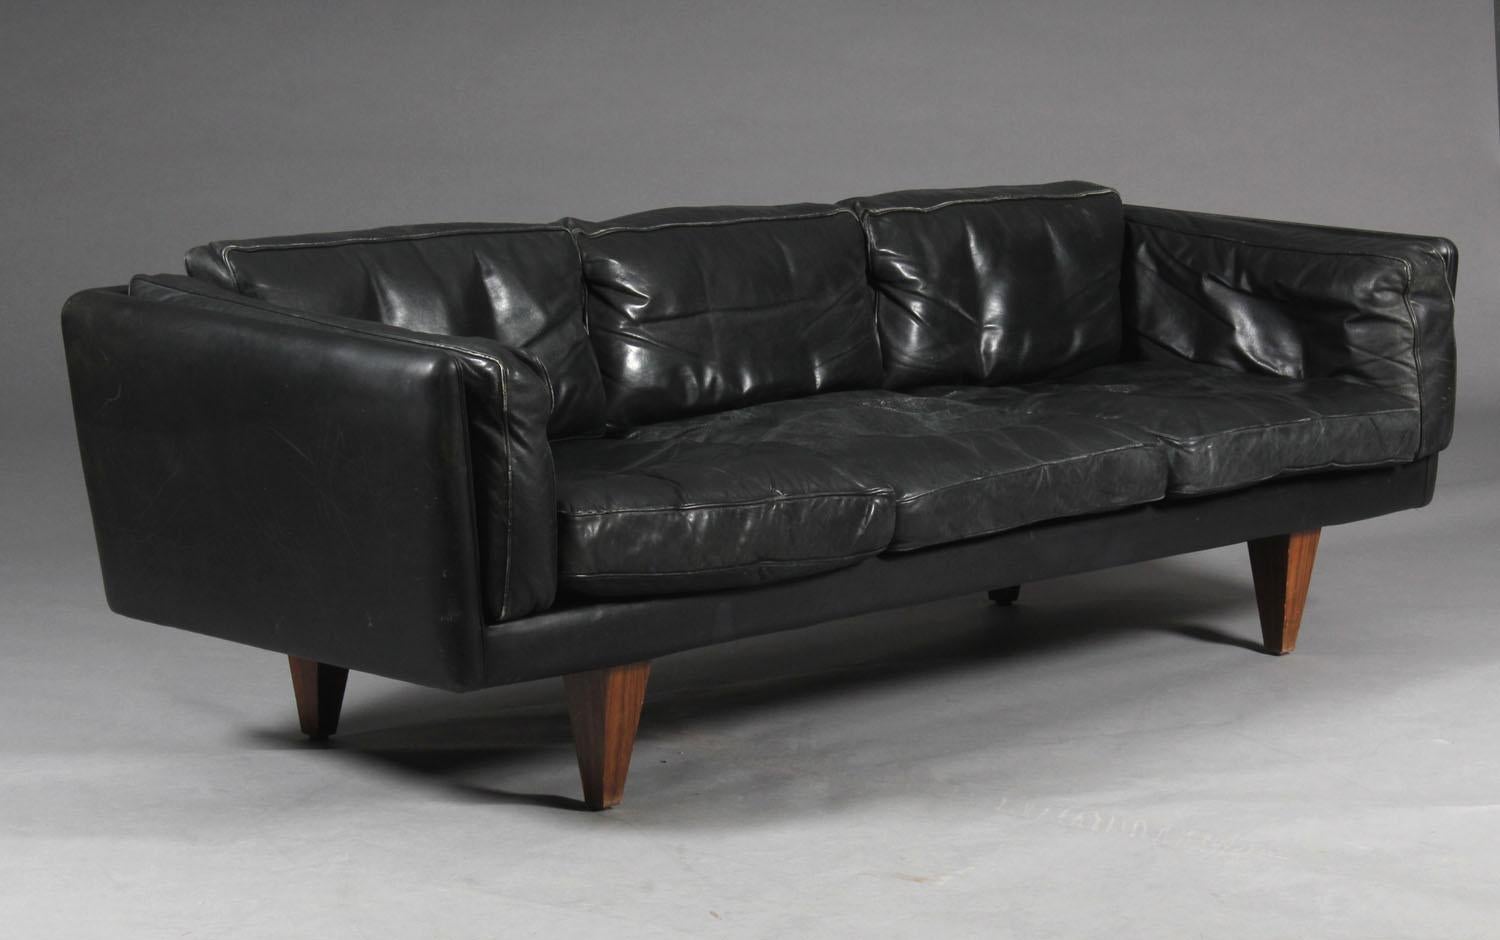 Illum Wikkelso. Three-seater sofa original upholstered with black patinated leather, cone-shaped legs in rosewood. Produced by Holger Kristiansen, 1960s, V11 series.

Illum Wikkelsø. Three-person sofa original covered with black patina
leather,